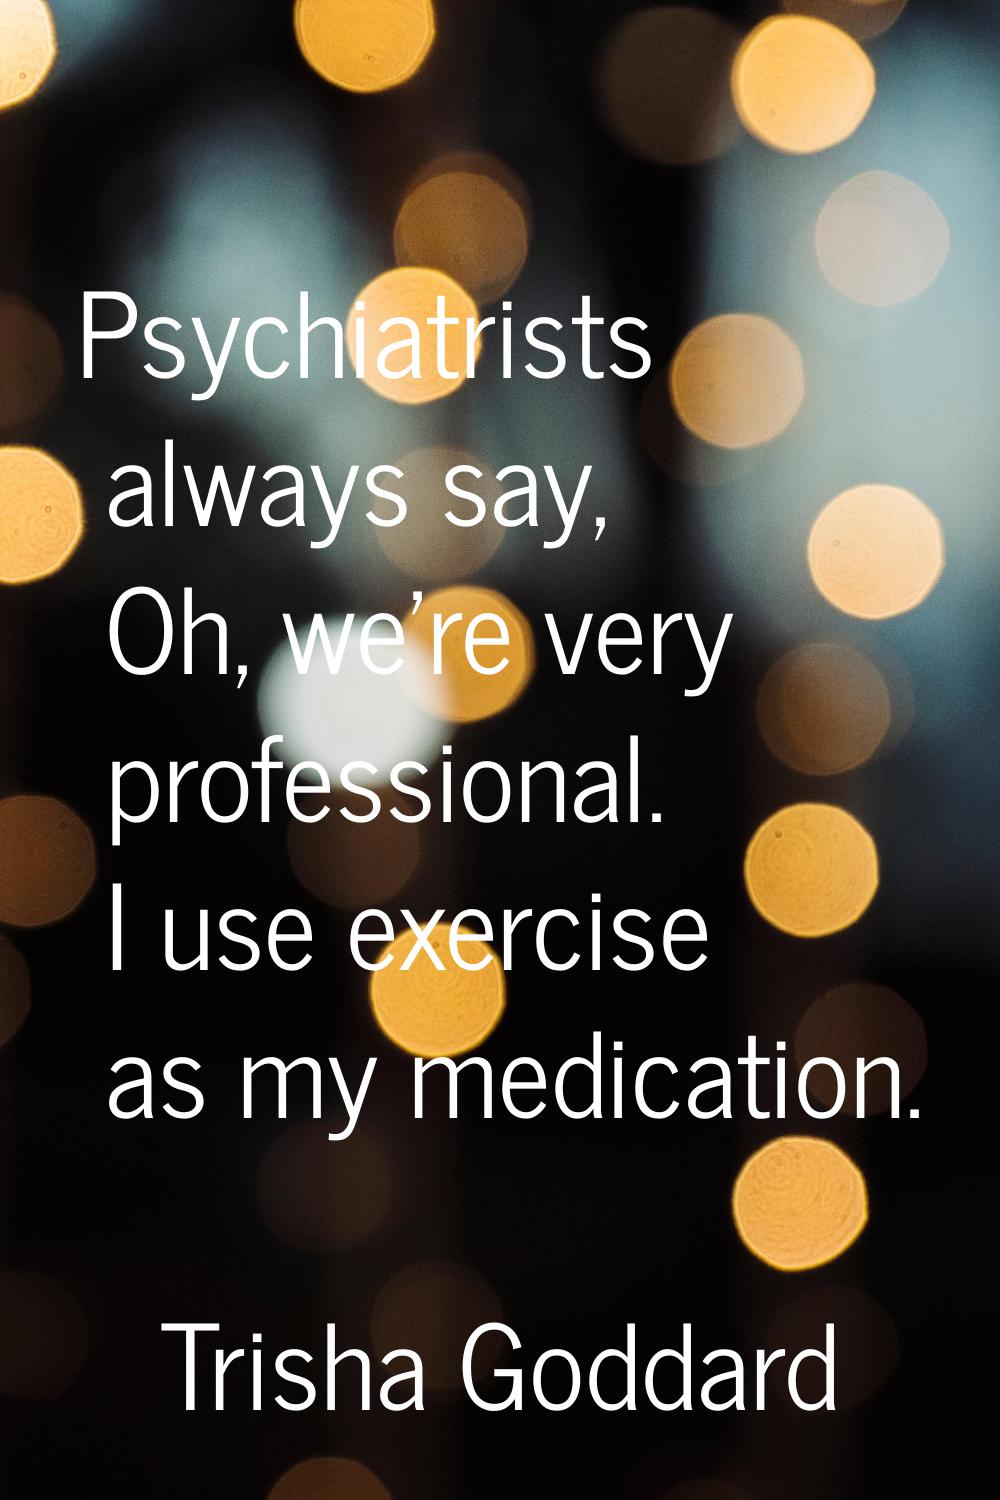 Psychiatrists always say, Oh, we're very professional. I use exercise as my medication.